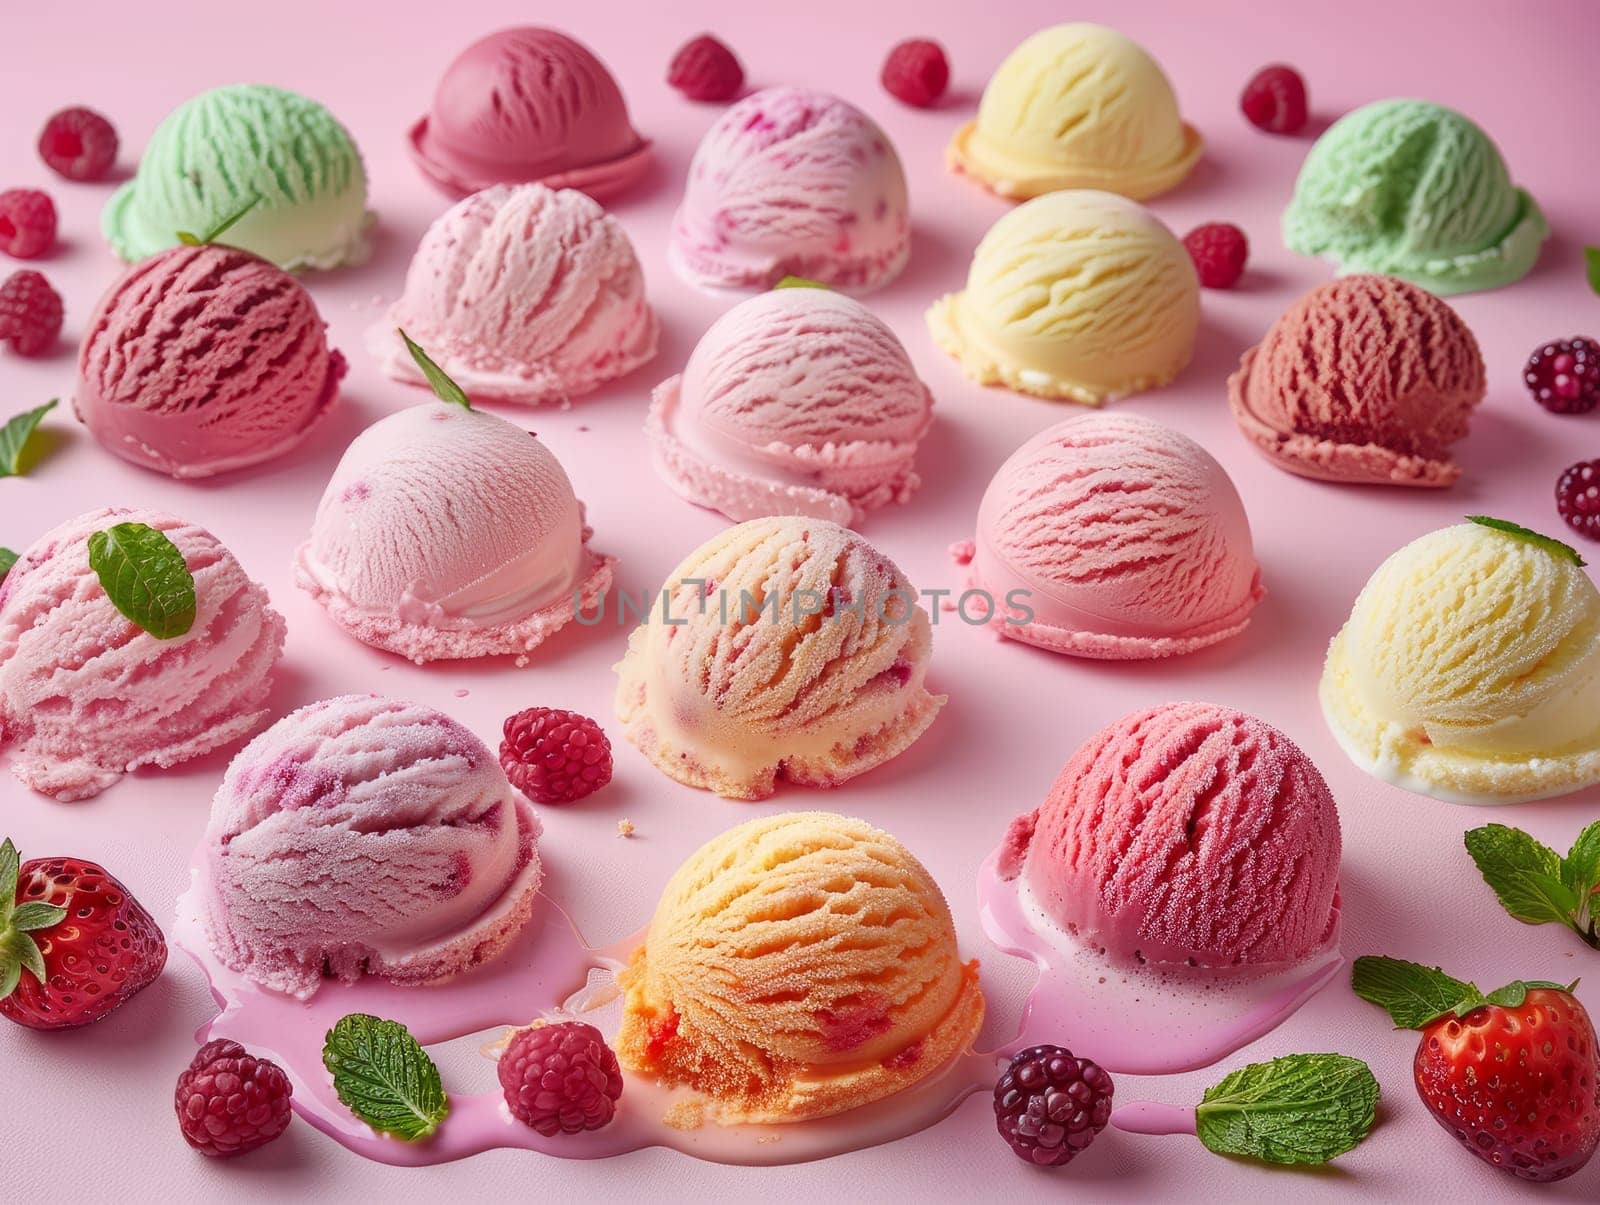 Assorted ice cream scoops with fresh berries